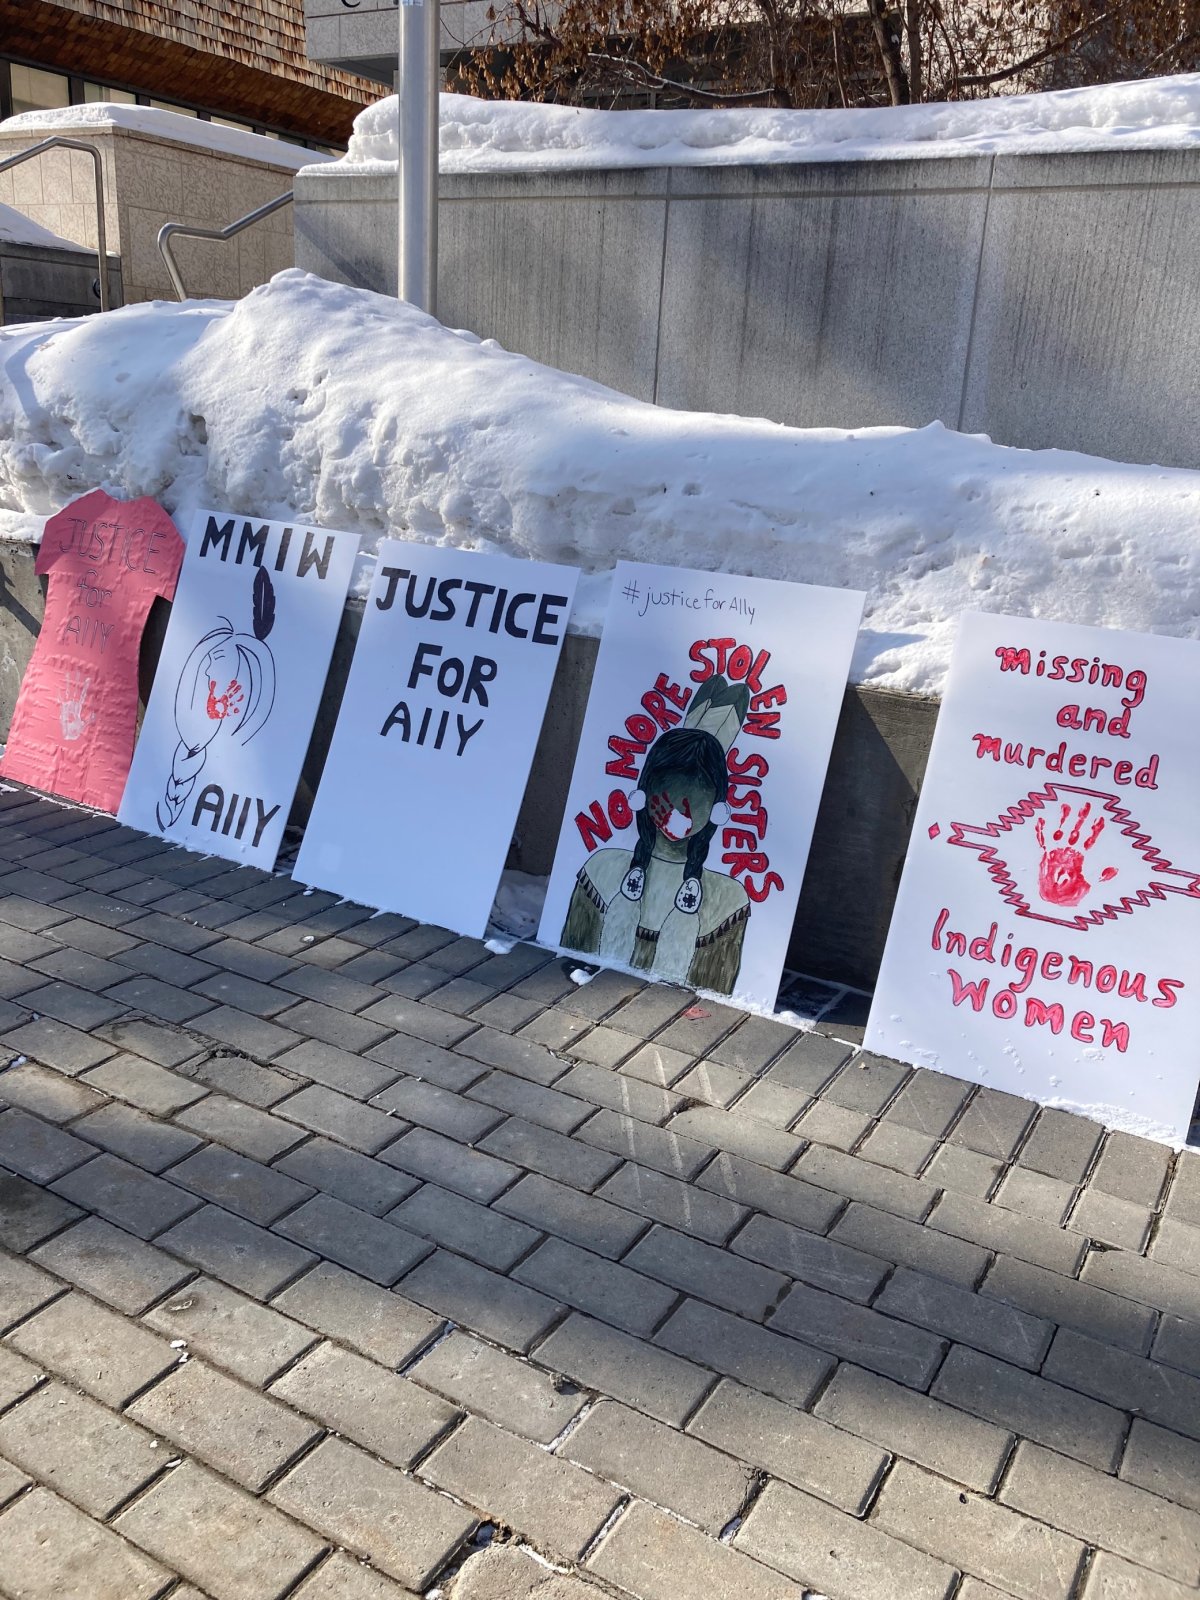 The brothers of Ally Moosehunter appeared at Saskatoon's Court of King's Bench on Monday and told the story of the day they found their sister, dead in her apartment.